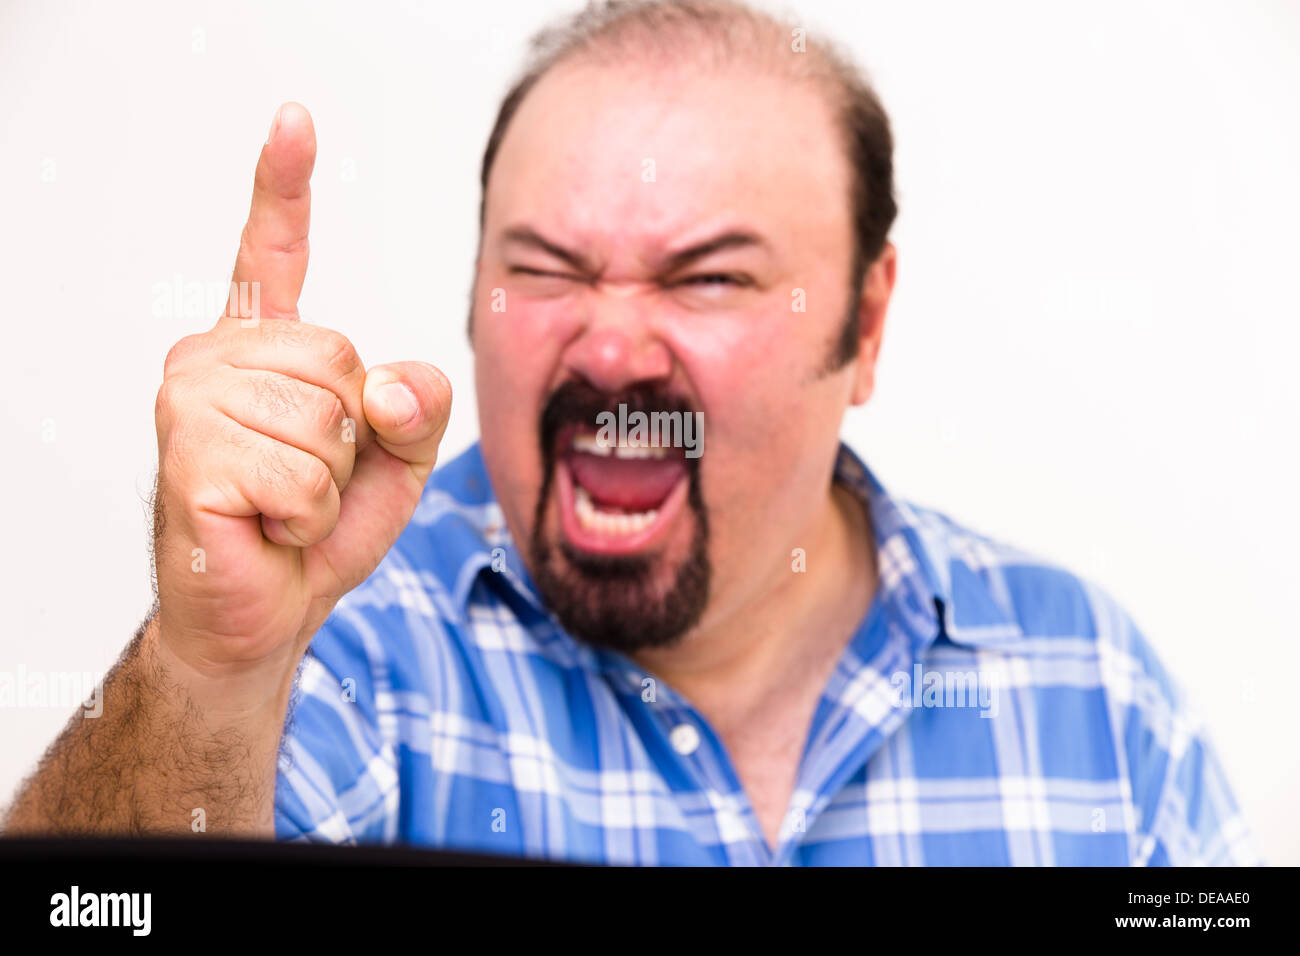 Horizontal portrait of an angry middle-aged Caucasian man screaming and threatening, isolated on white background Stock Photo